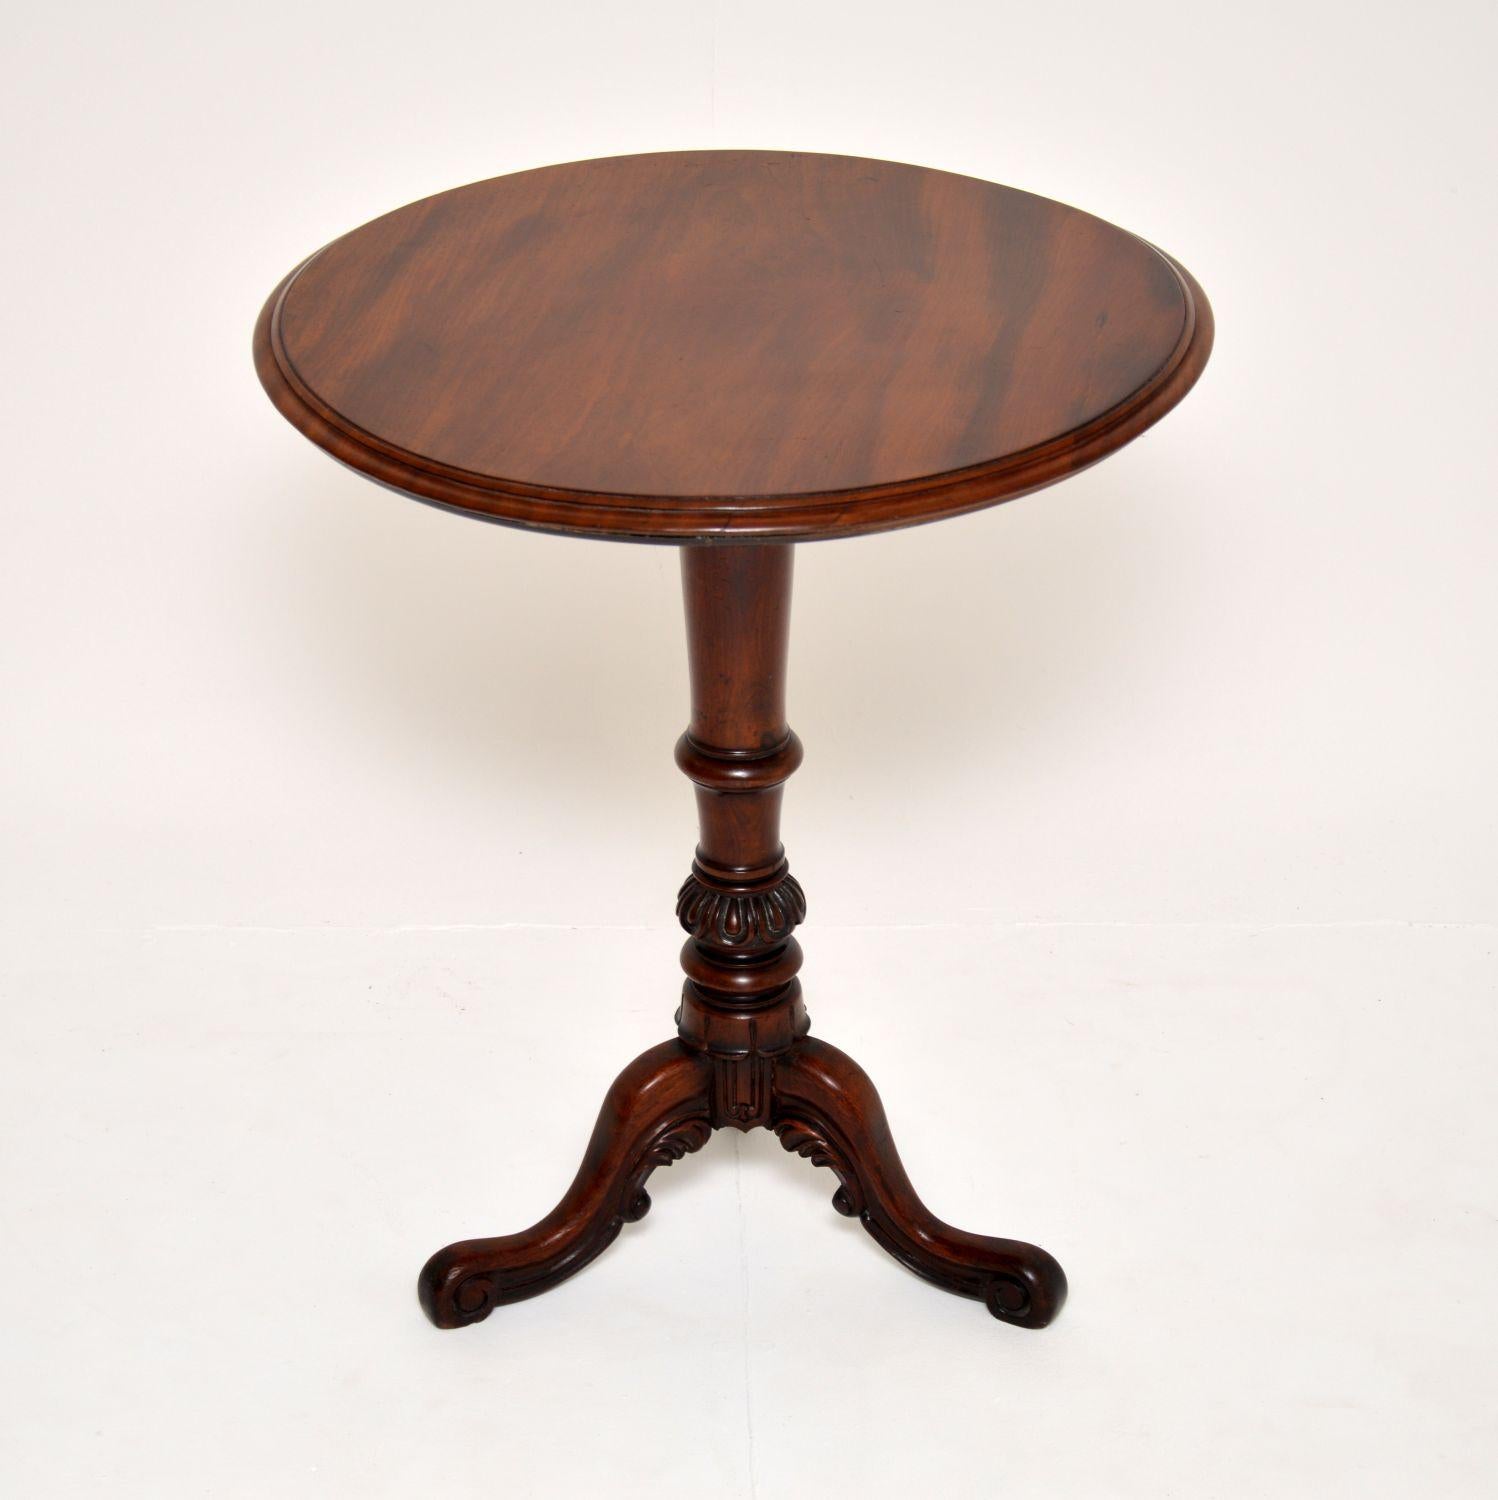 A fantastic original antique William IV period occasional table. This was made in England, it dates from around the 1830-1840 period.

It is of amazing quality, with a very strong and gutsy design. The central column base has beautiful carving and